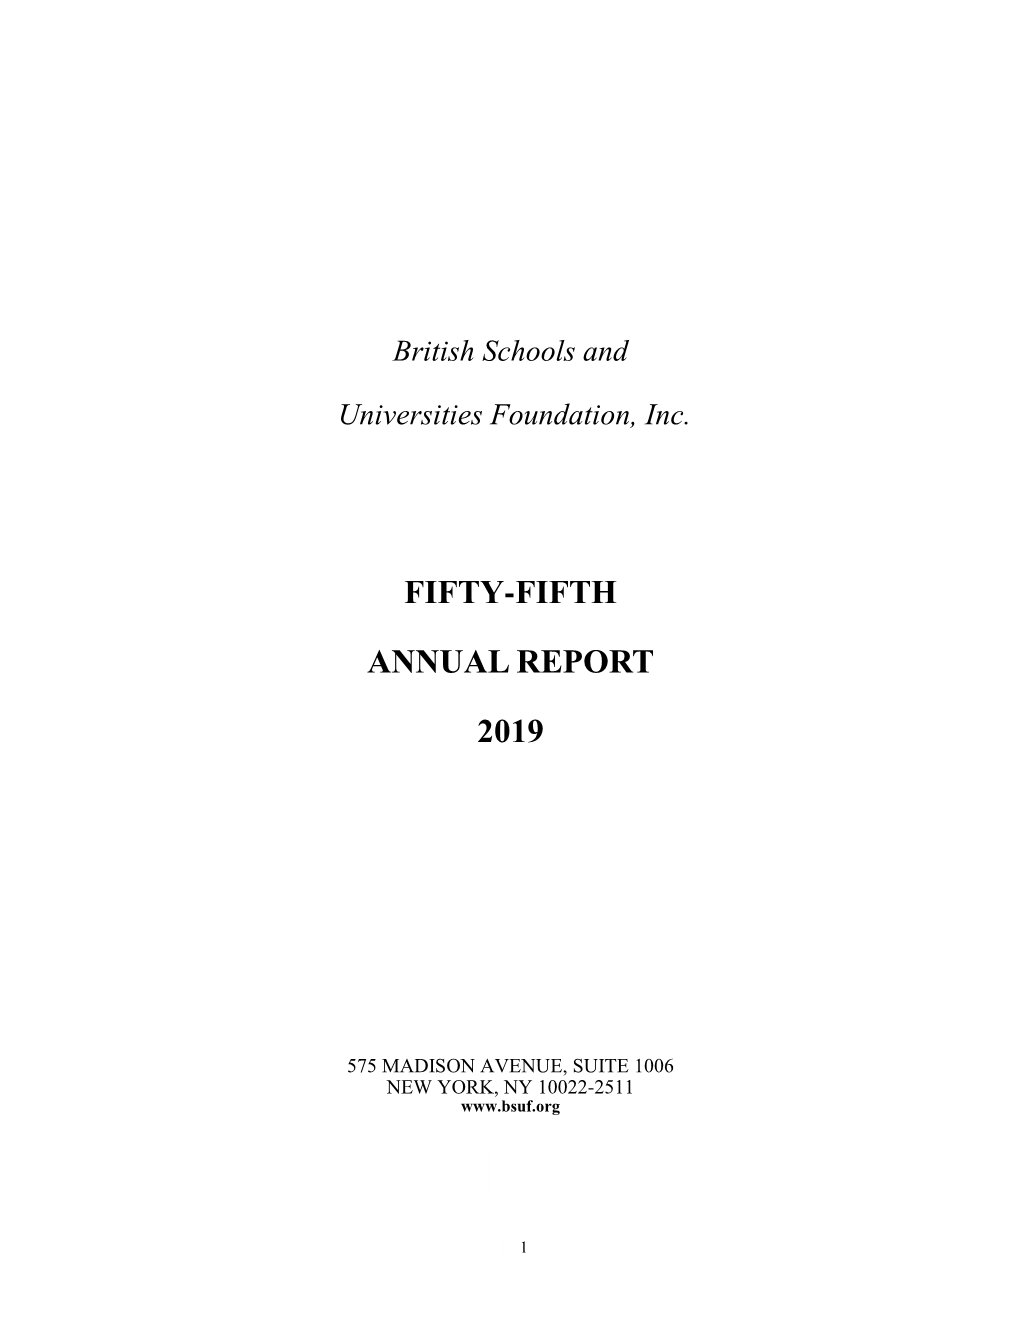 Fifty-Fifth Annual Report 2019